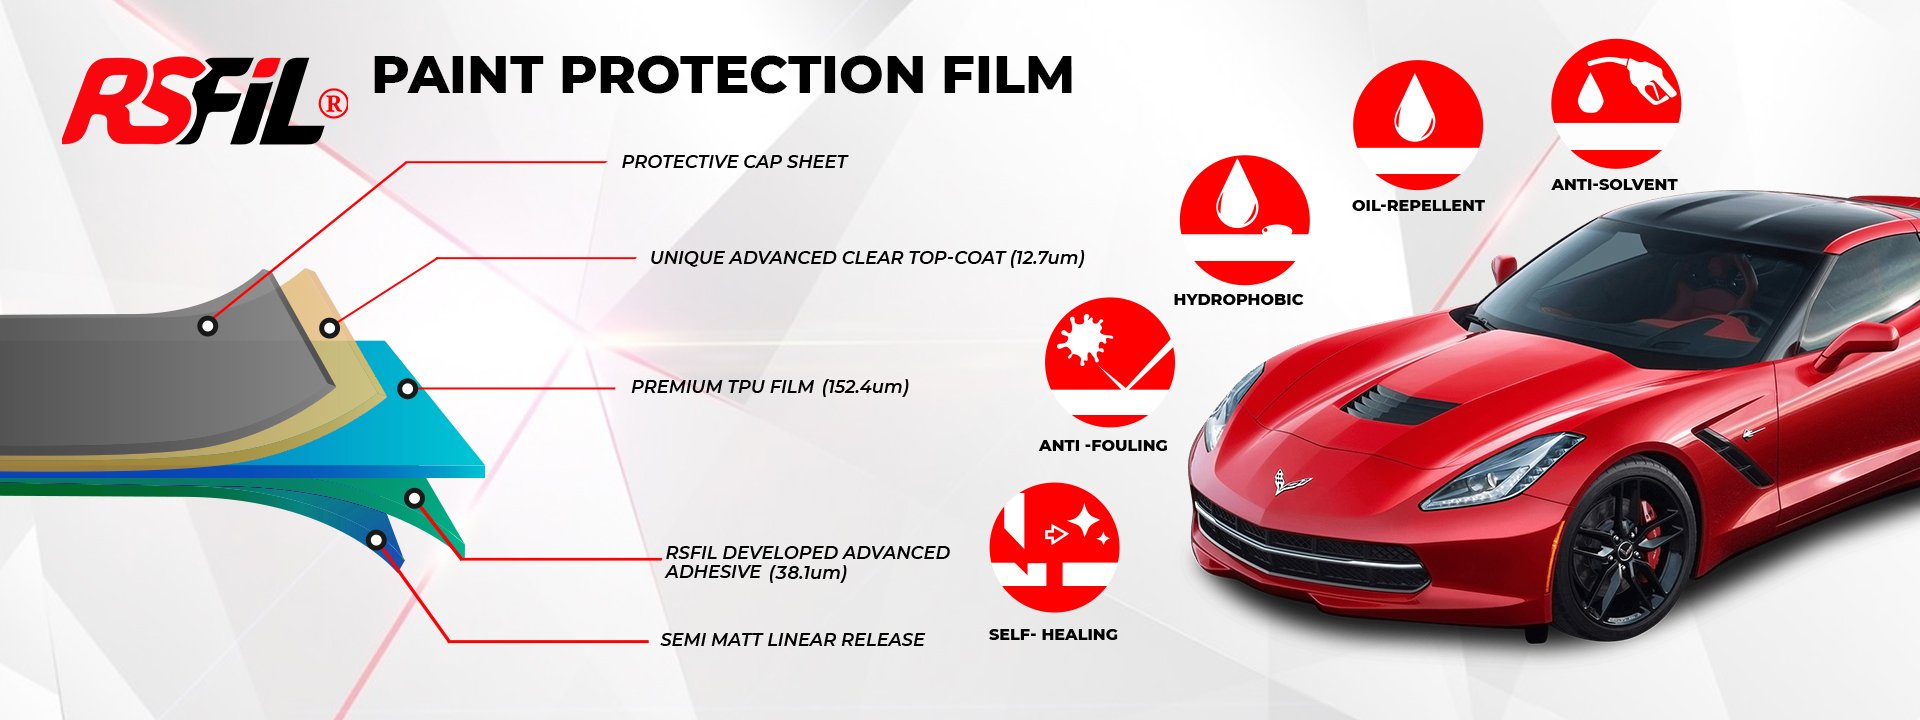 PAINT PROTECTION FILM